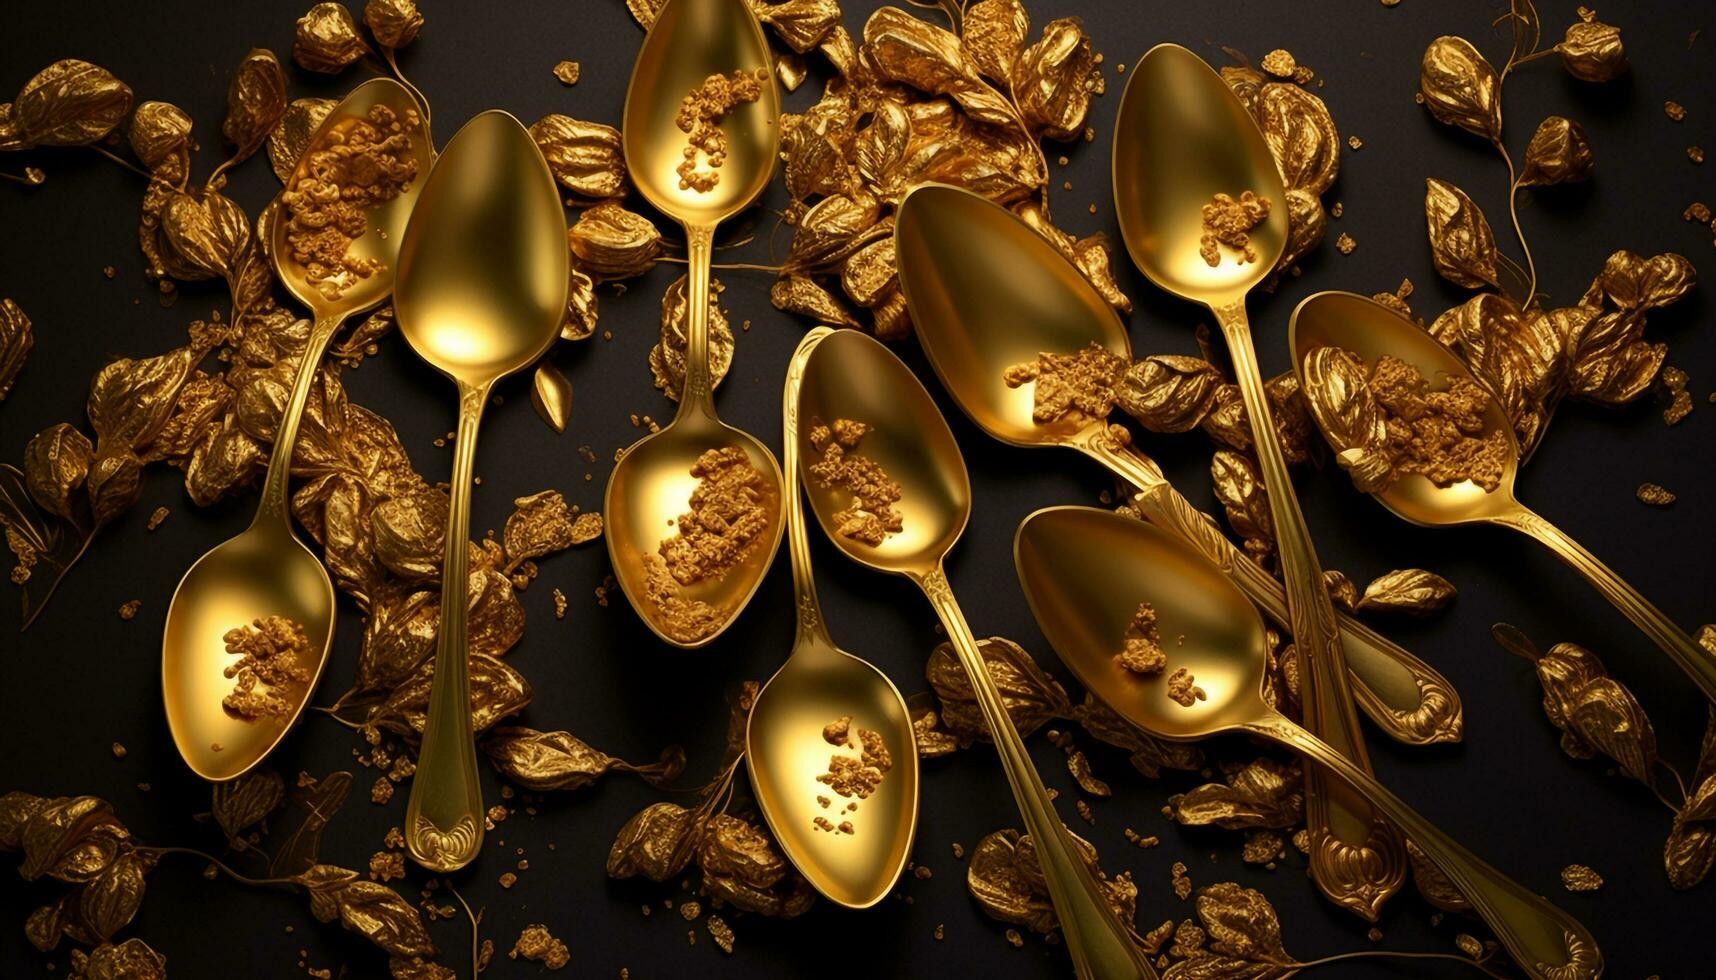 golden spoons picture photo